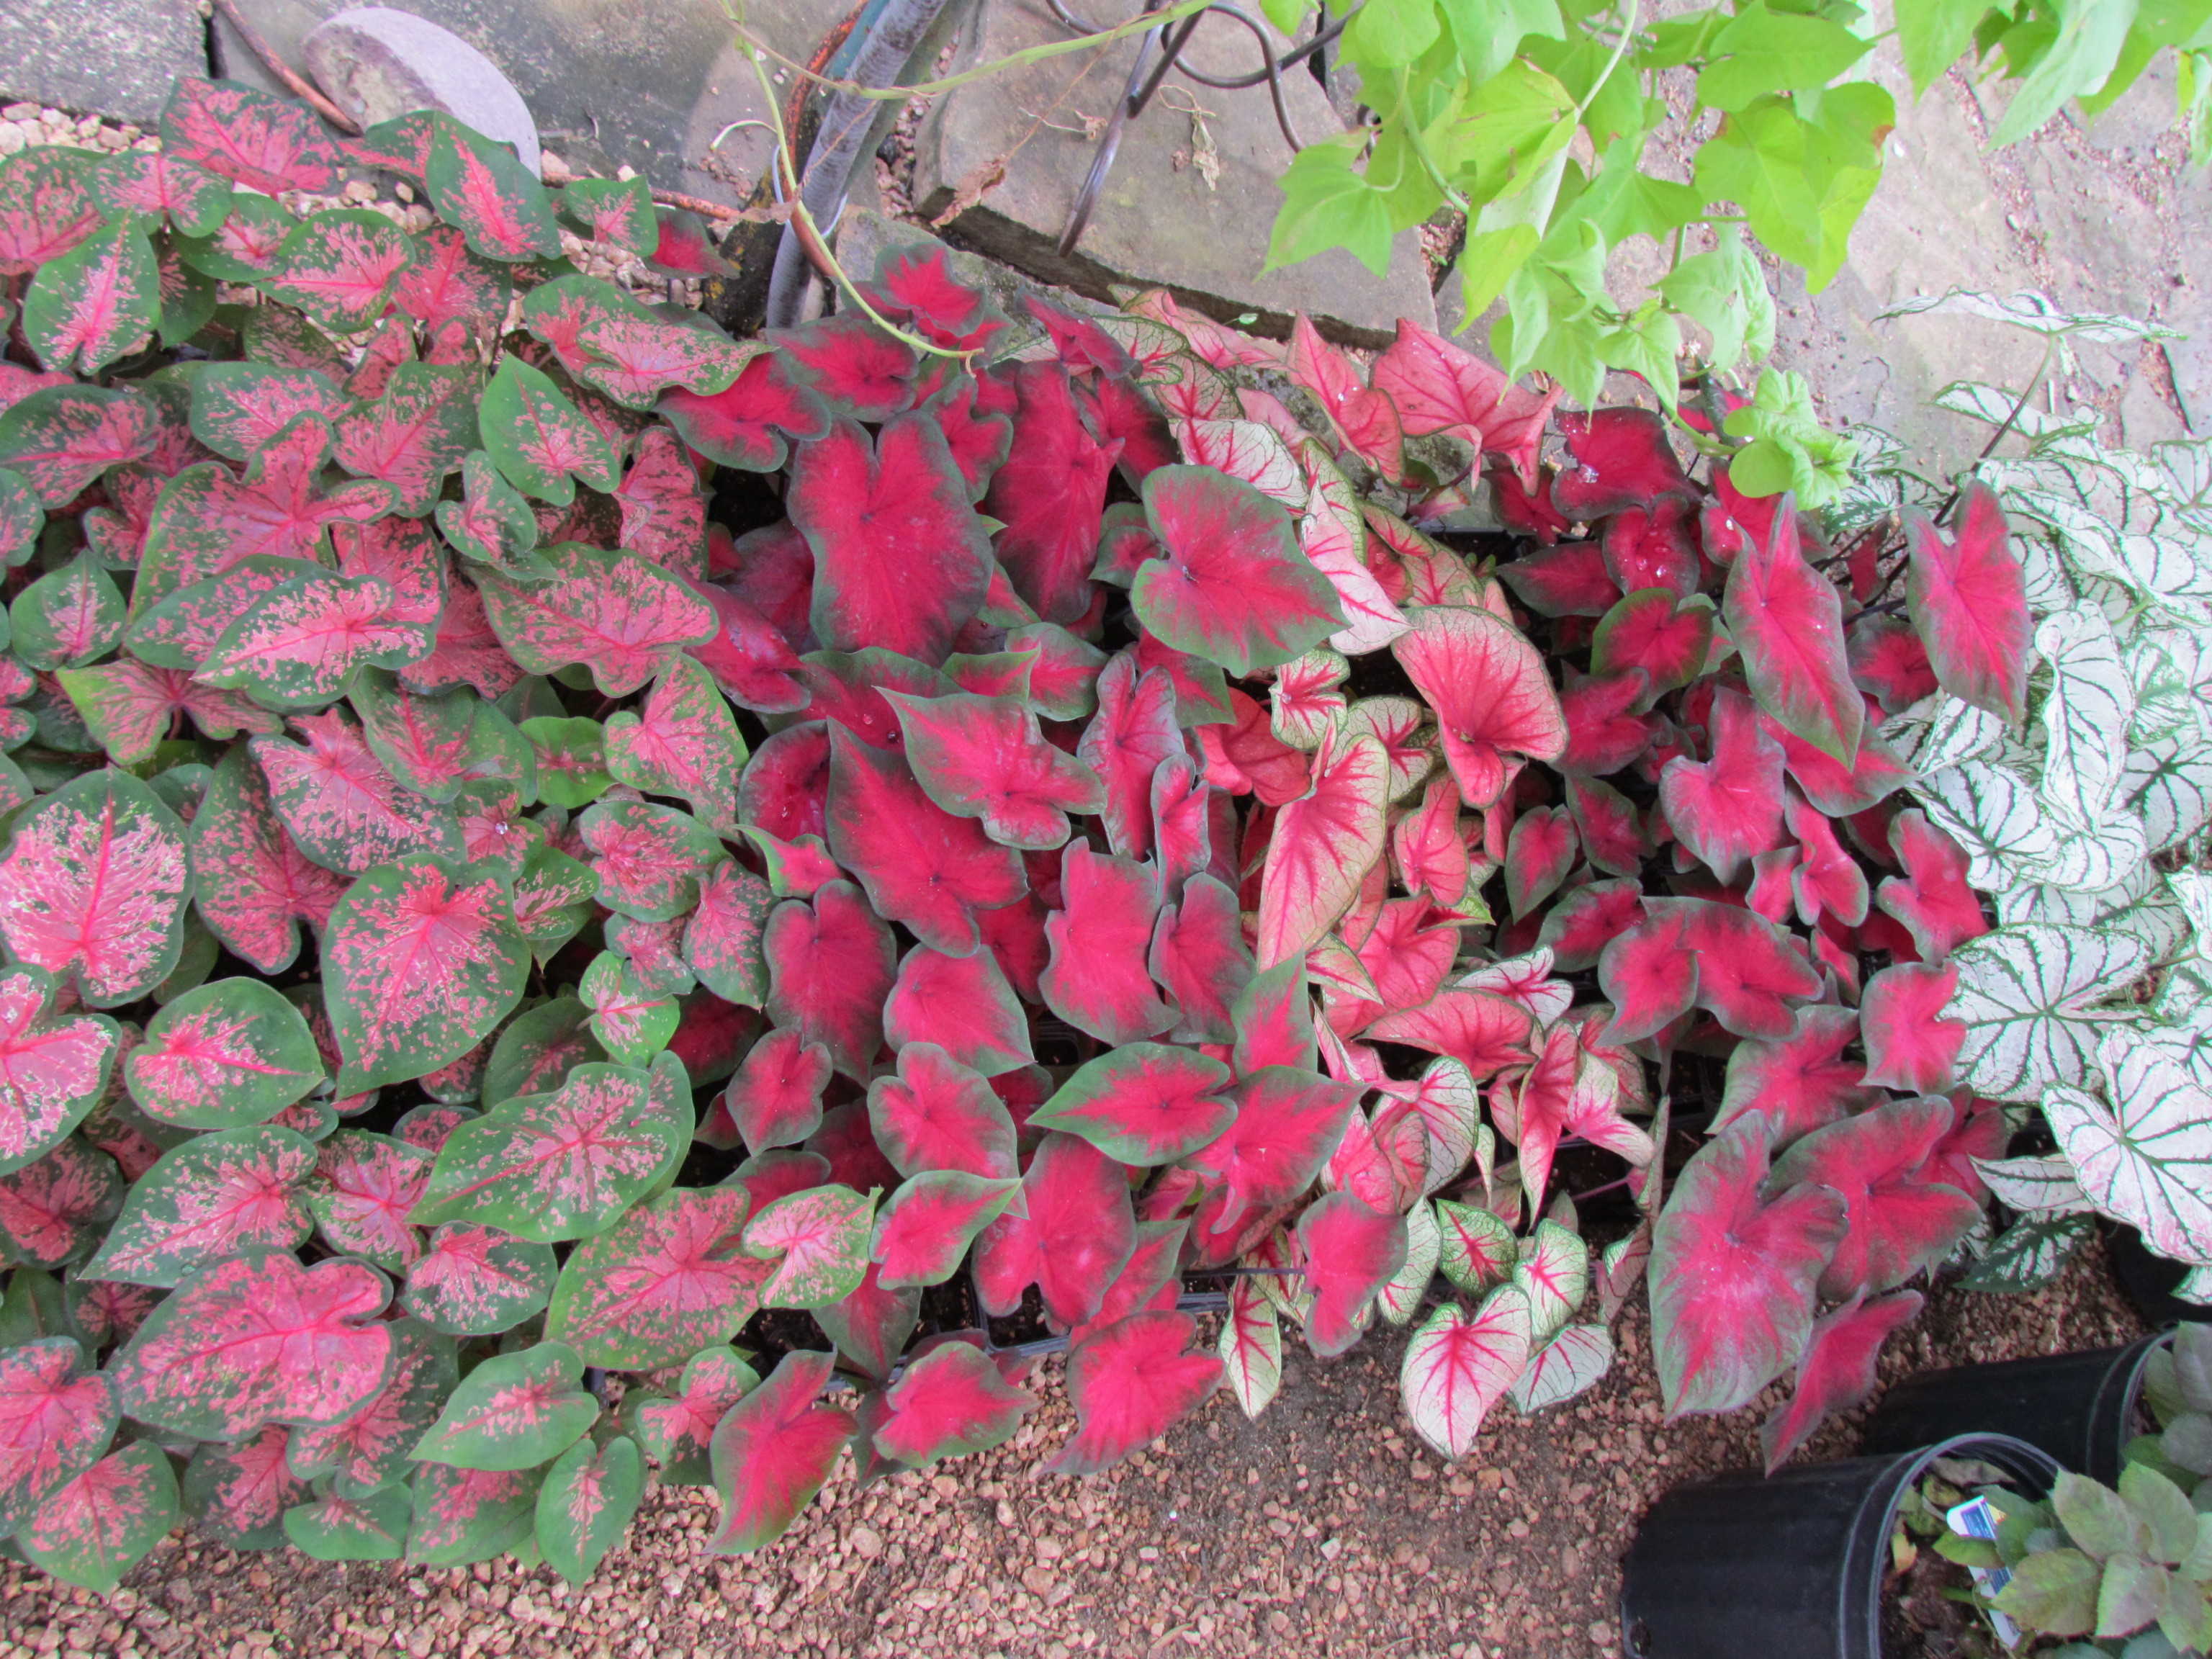 Groundcover like Caladiums and more available J&J Nursery, Spring, TX